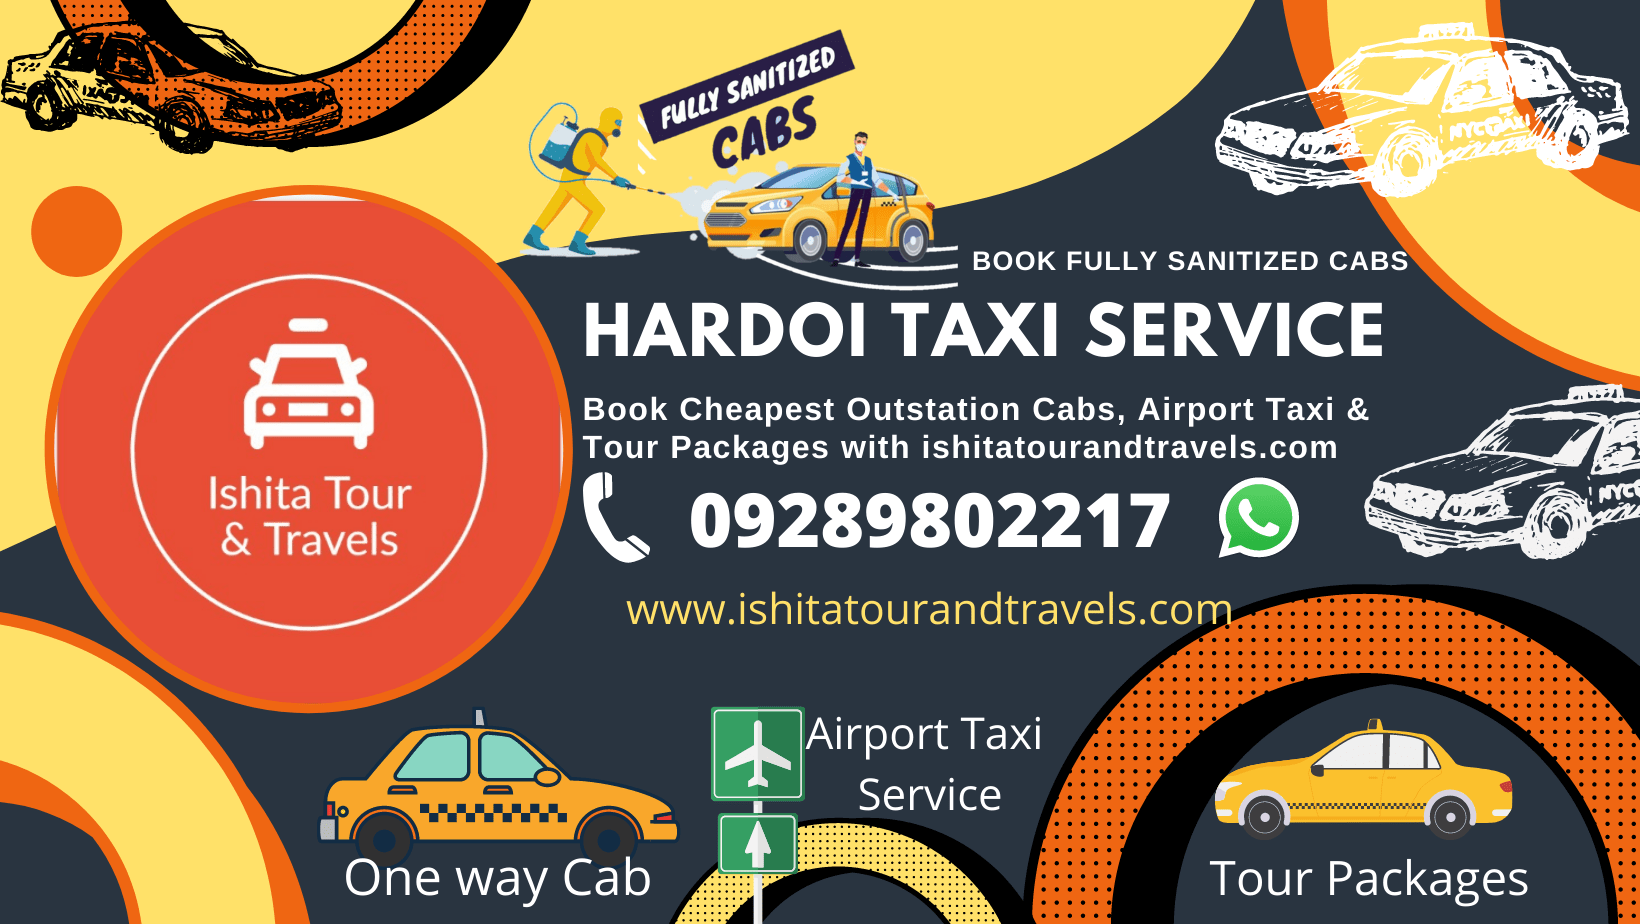 Hardoi Taxi Service Book Cheapest Outstation One-way Cab & Airport Taxi